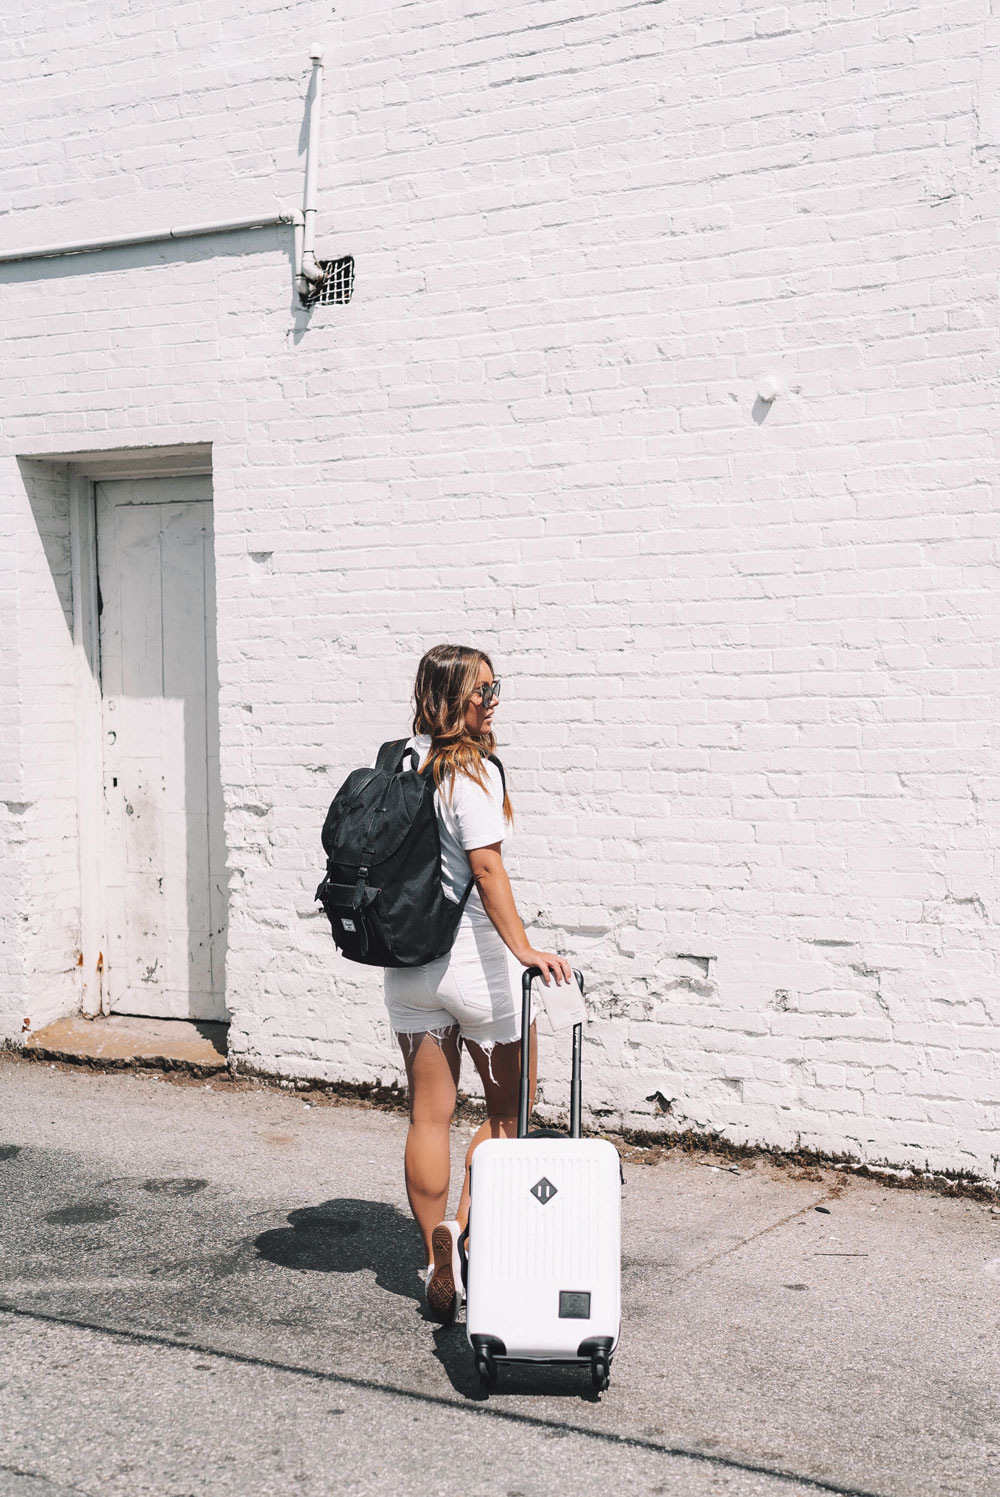 Best carry-on luggage with Herschel Trade Carry-On